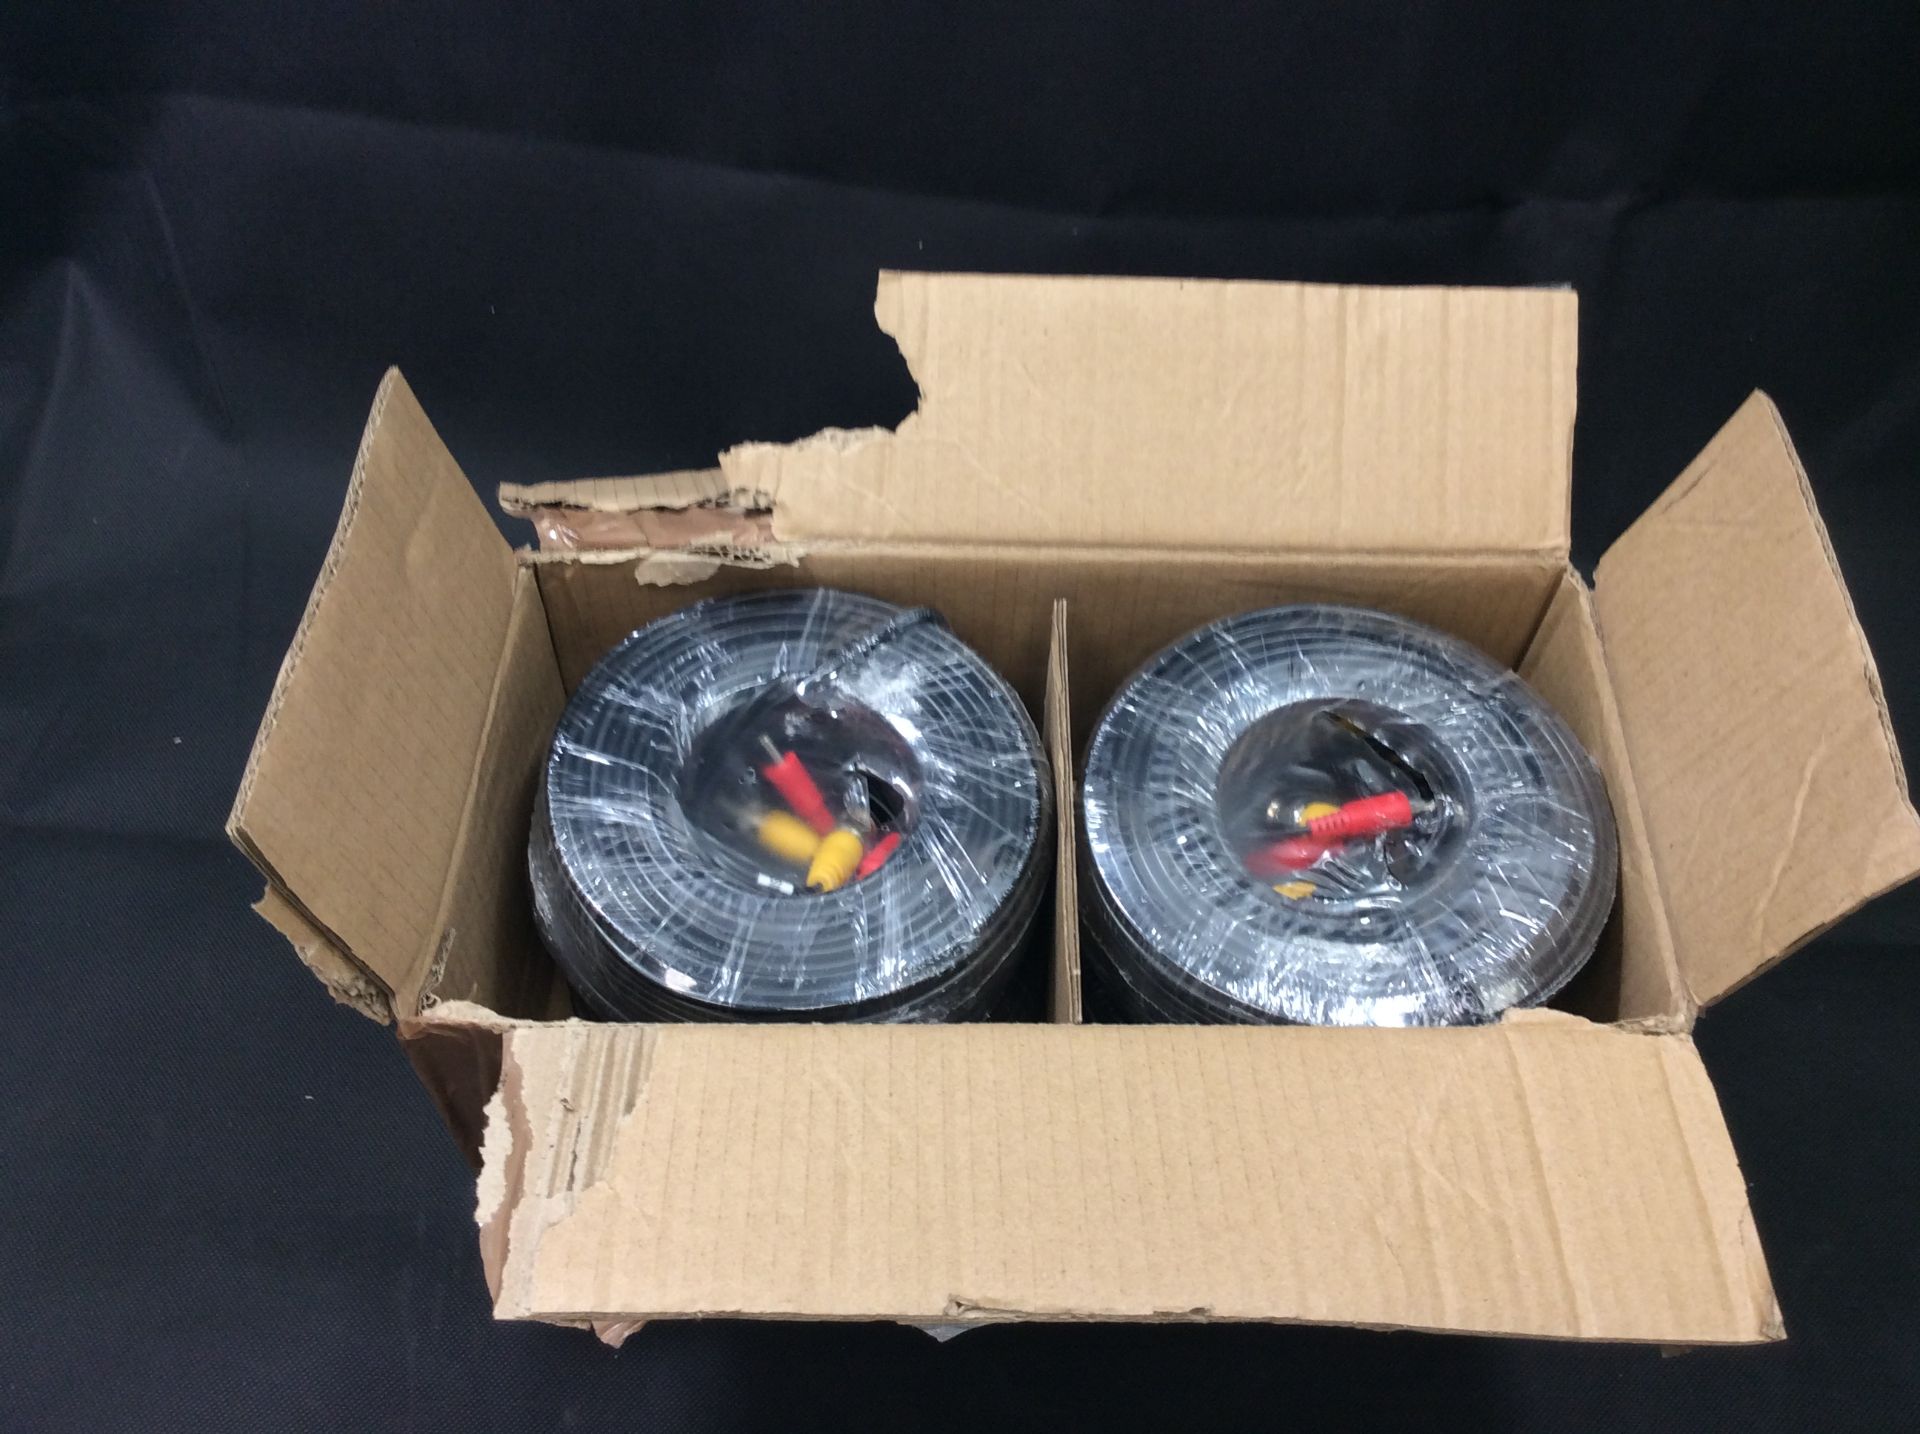 4 rolls of annke cctv cable